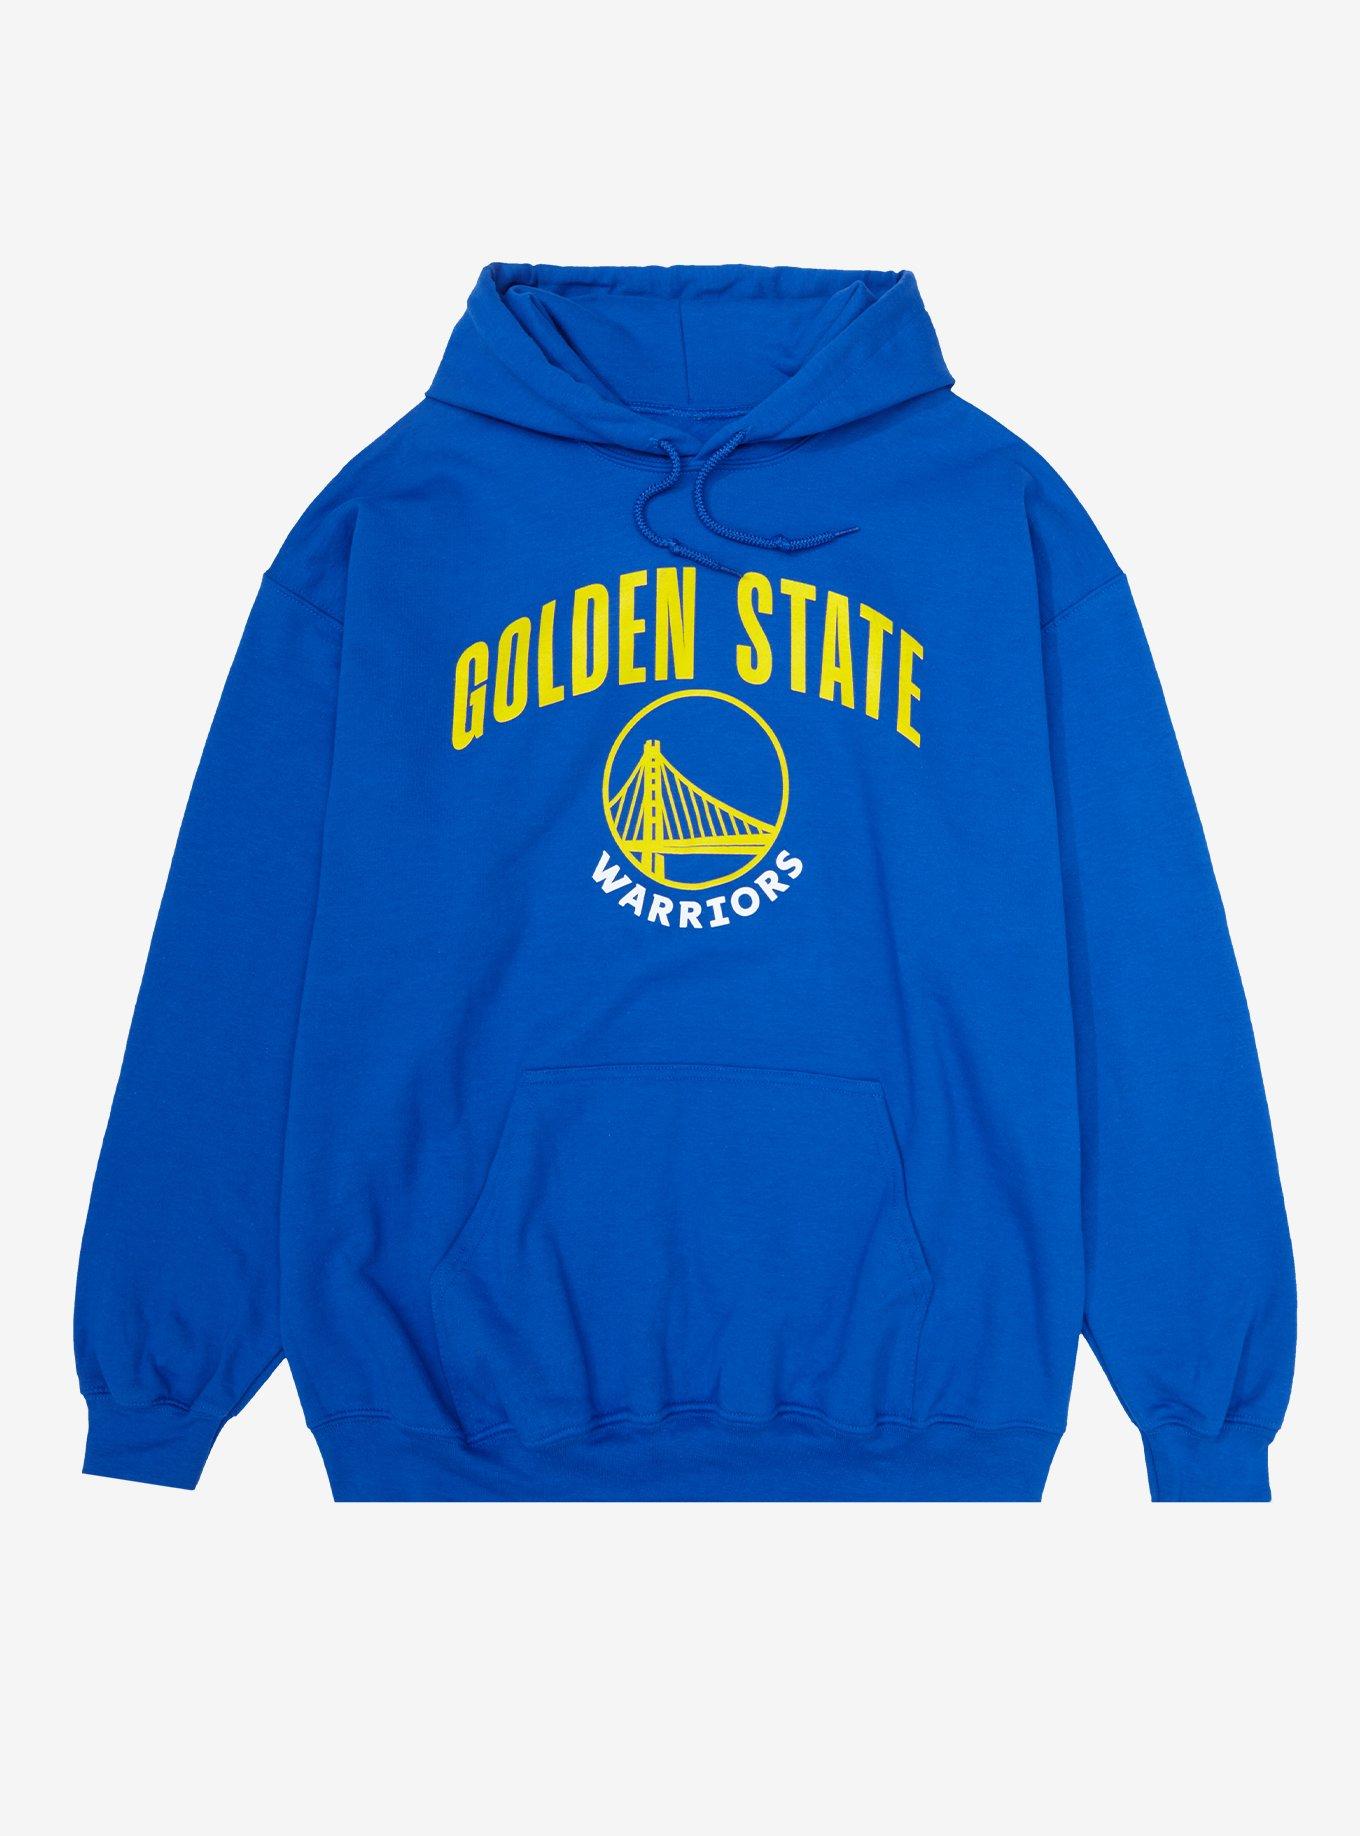 Her Universe NBA Golden State Warriors Hoodie Plus Size